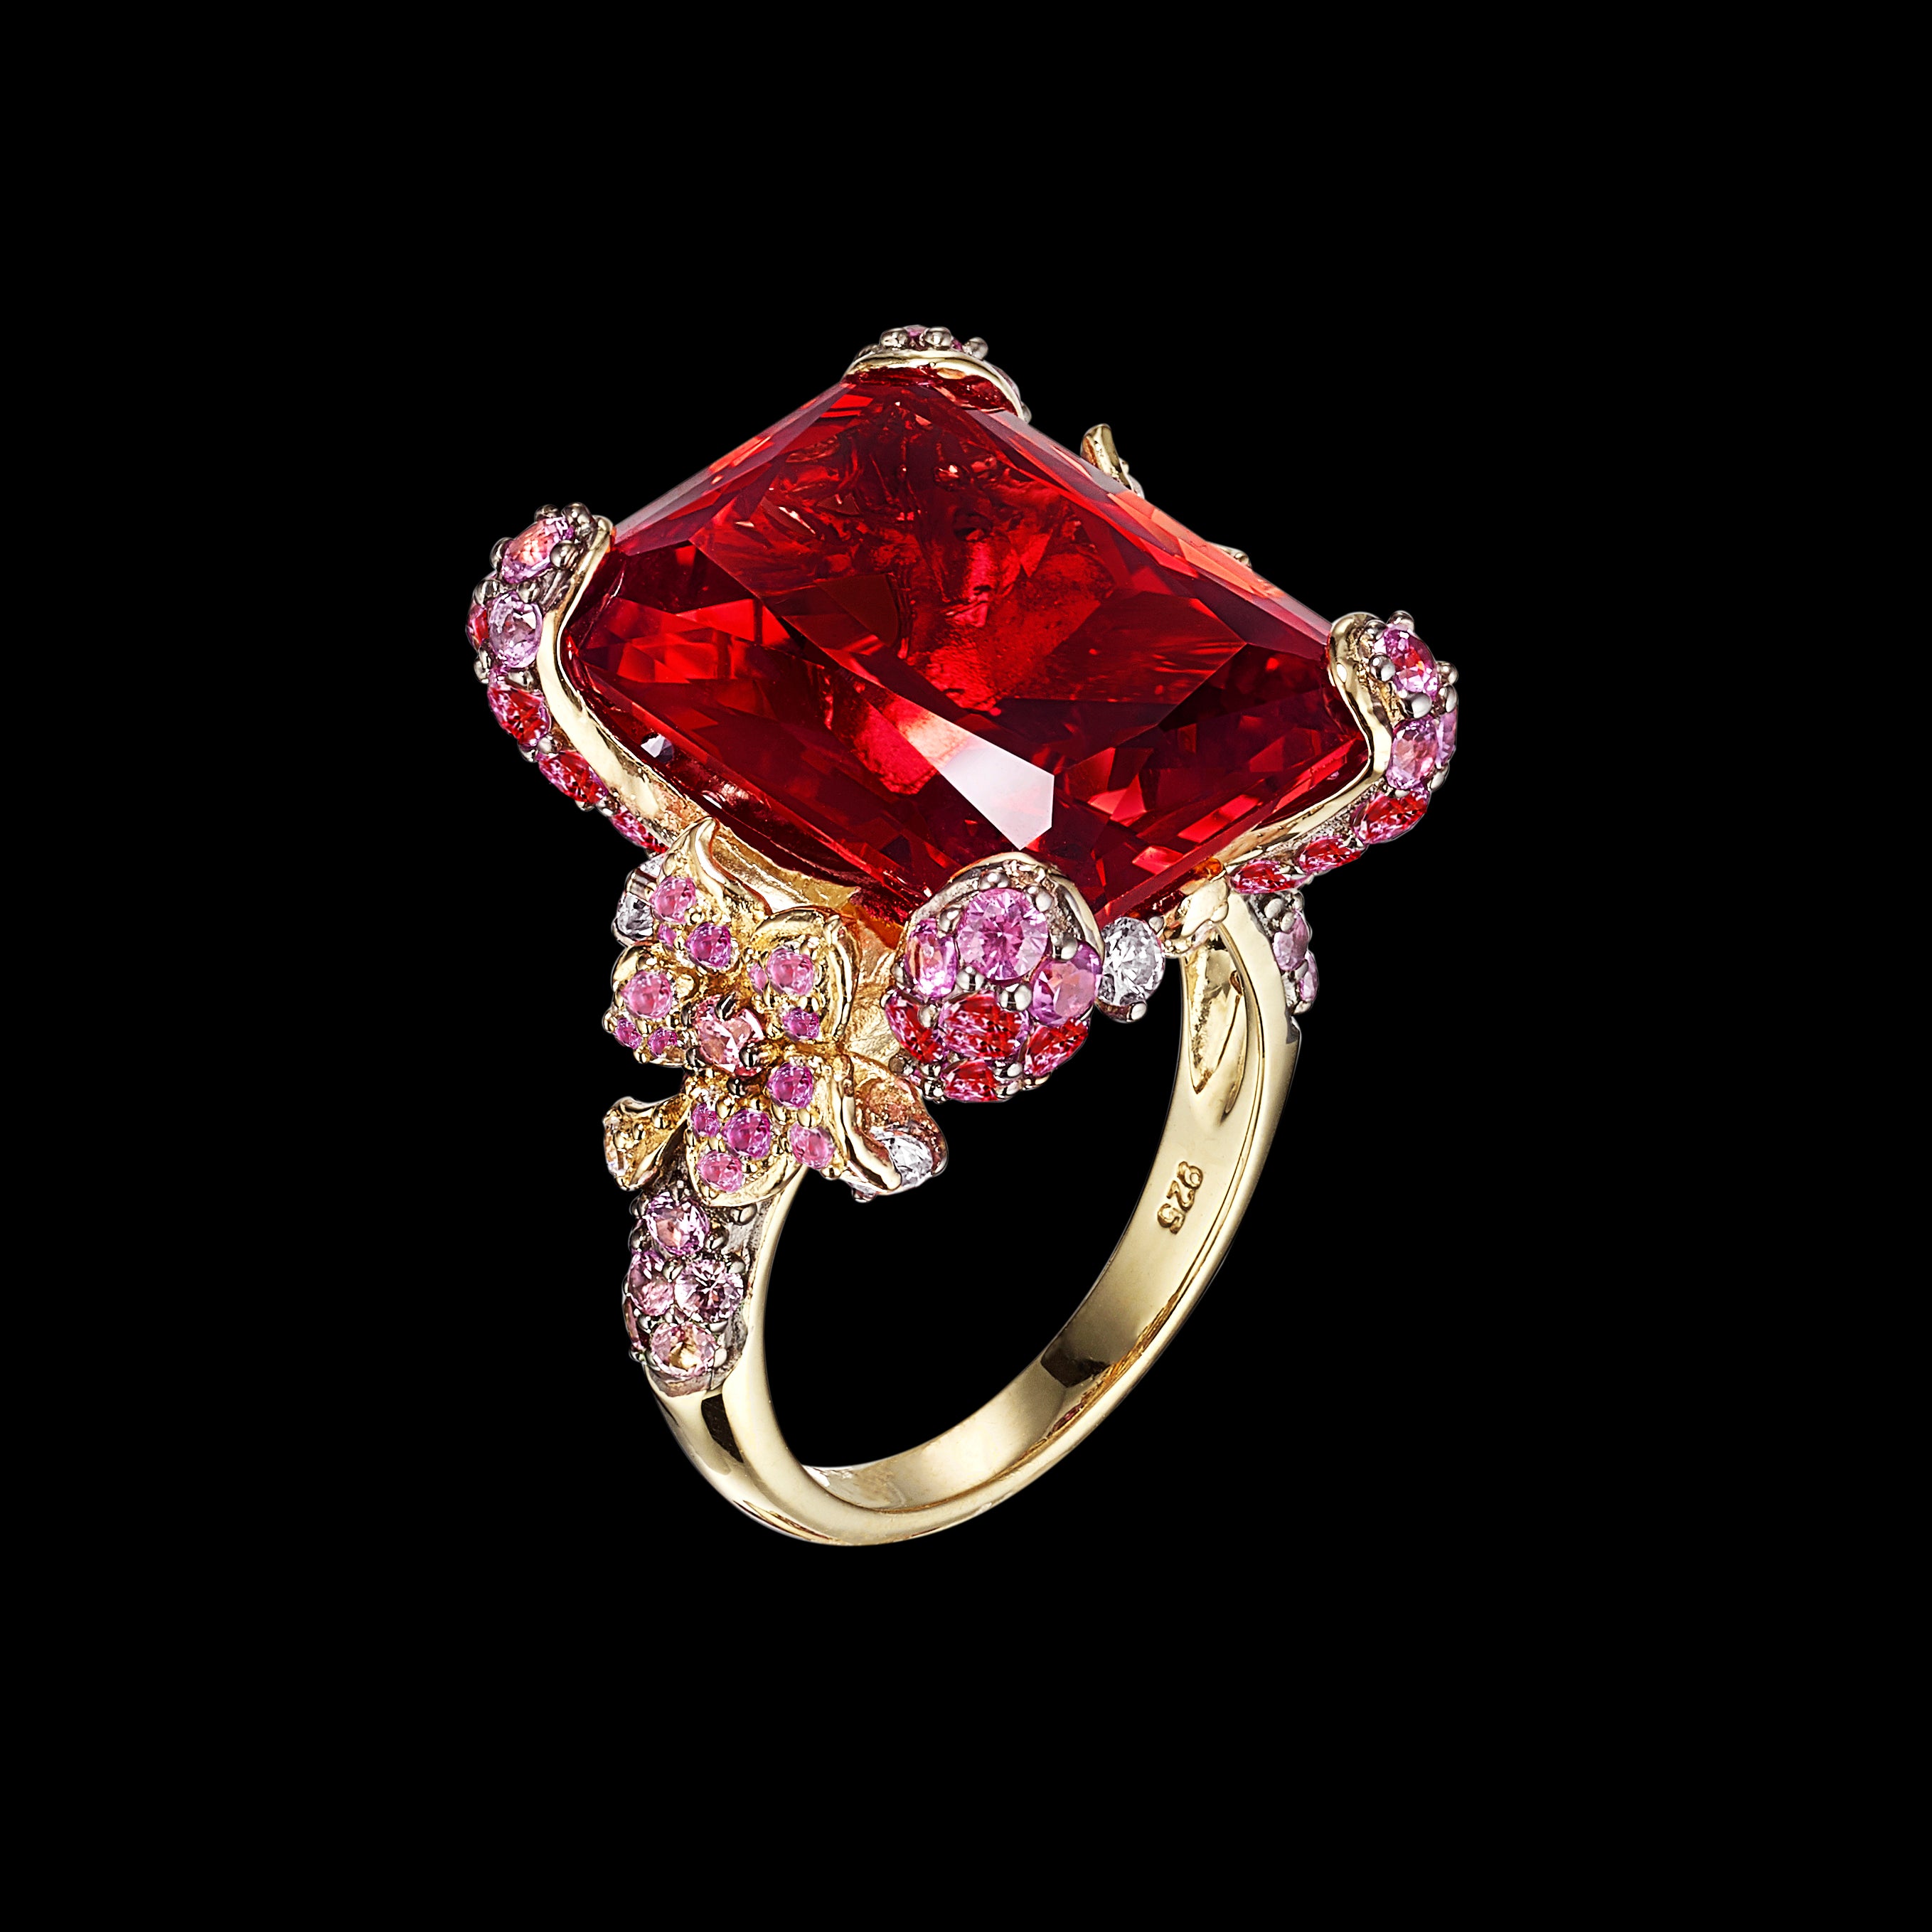 Ruby Cinderella Ring, Ring, Anabela Chan Joaillerie - Fine jewelry with laboratory grown and created gemstones hand-crafted in the United Kingdom. Anabela Chan Joaillerie is the first fine jewellery brand in the world to champion laboratory-grown and created gemstones with high jewellery design, artisanal craftsmanship and a focus on ethical and sustainable innovations.